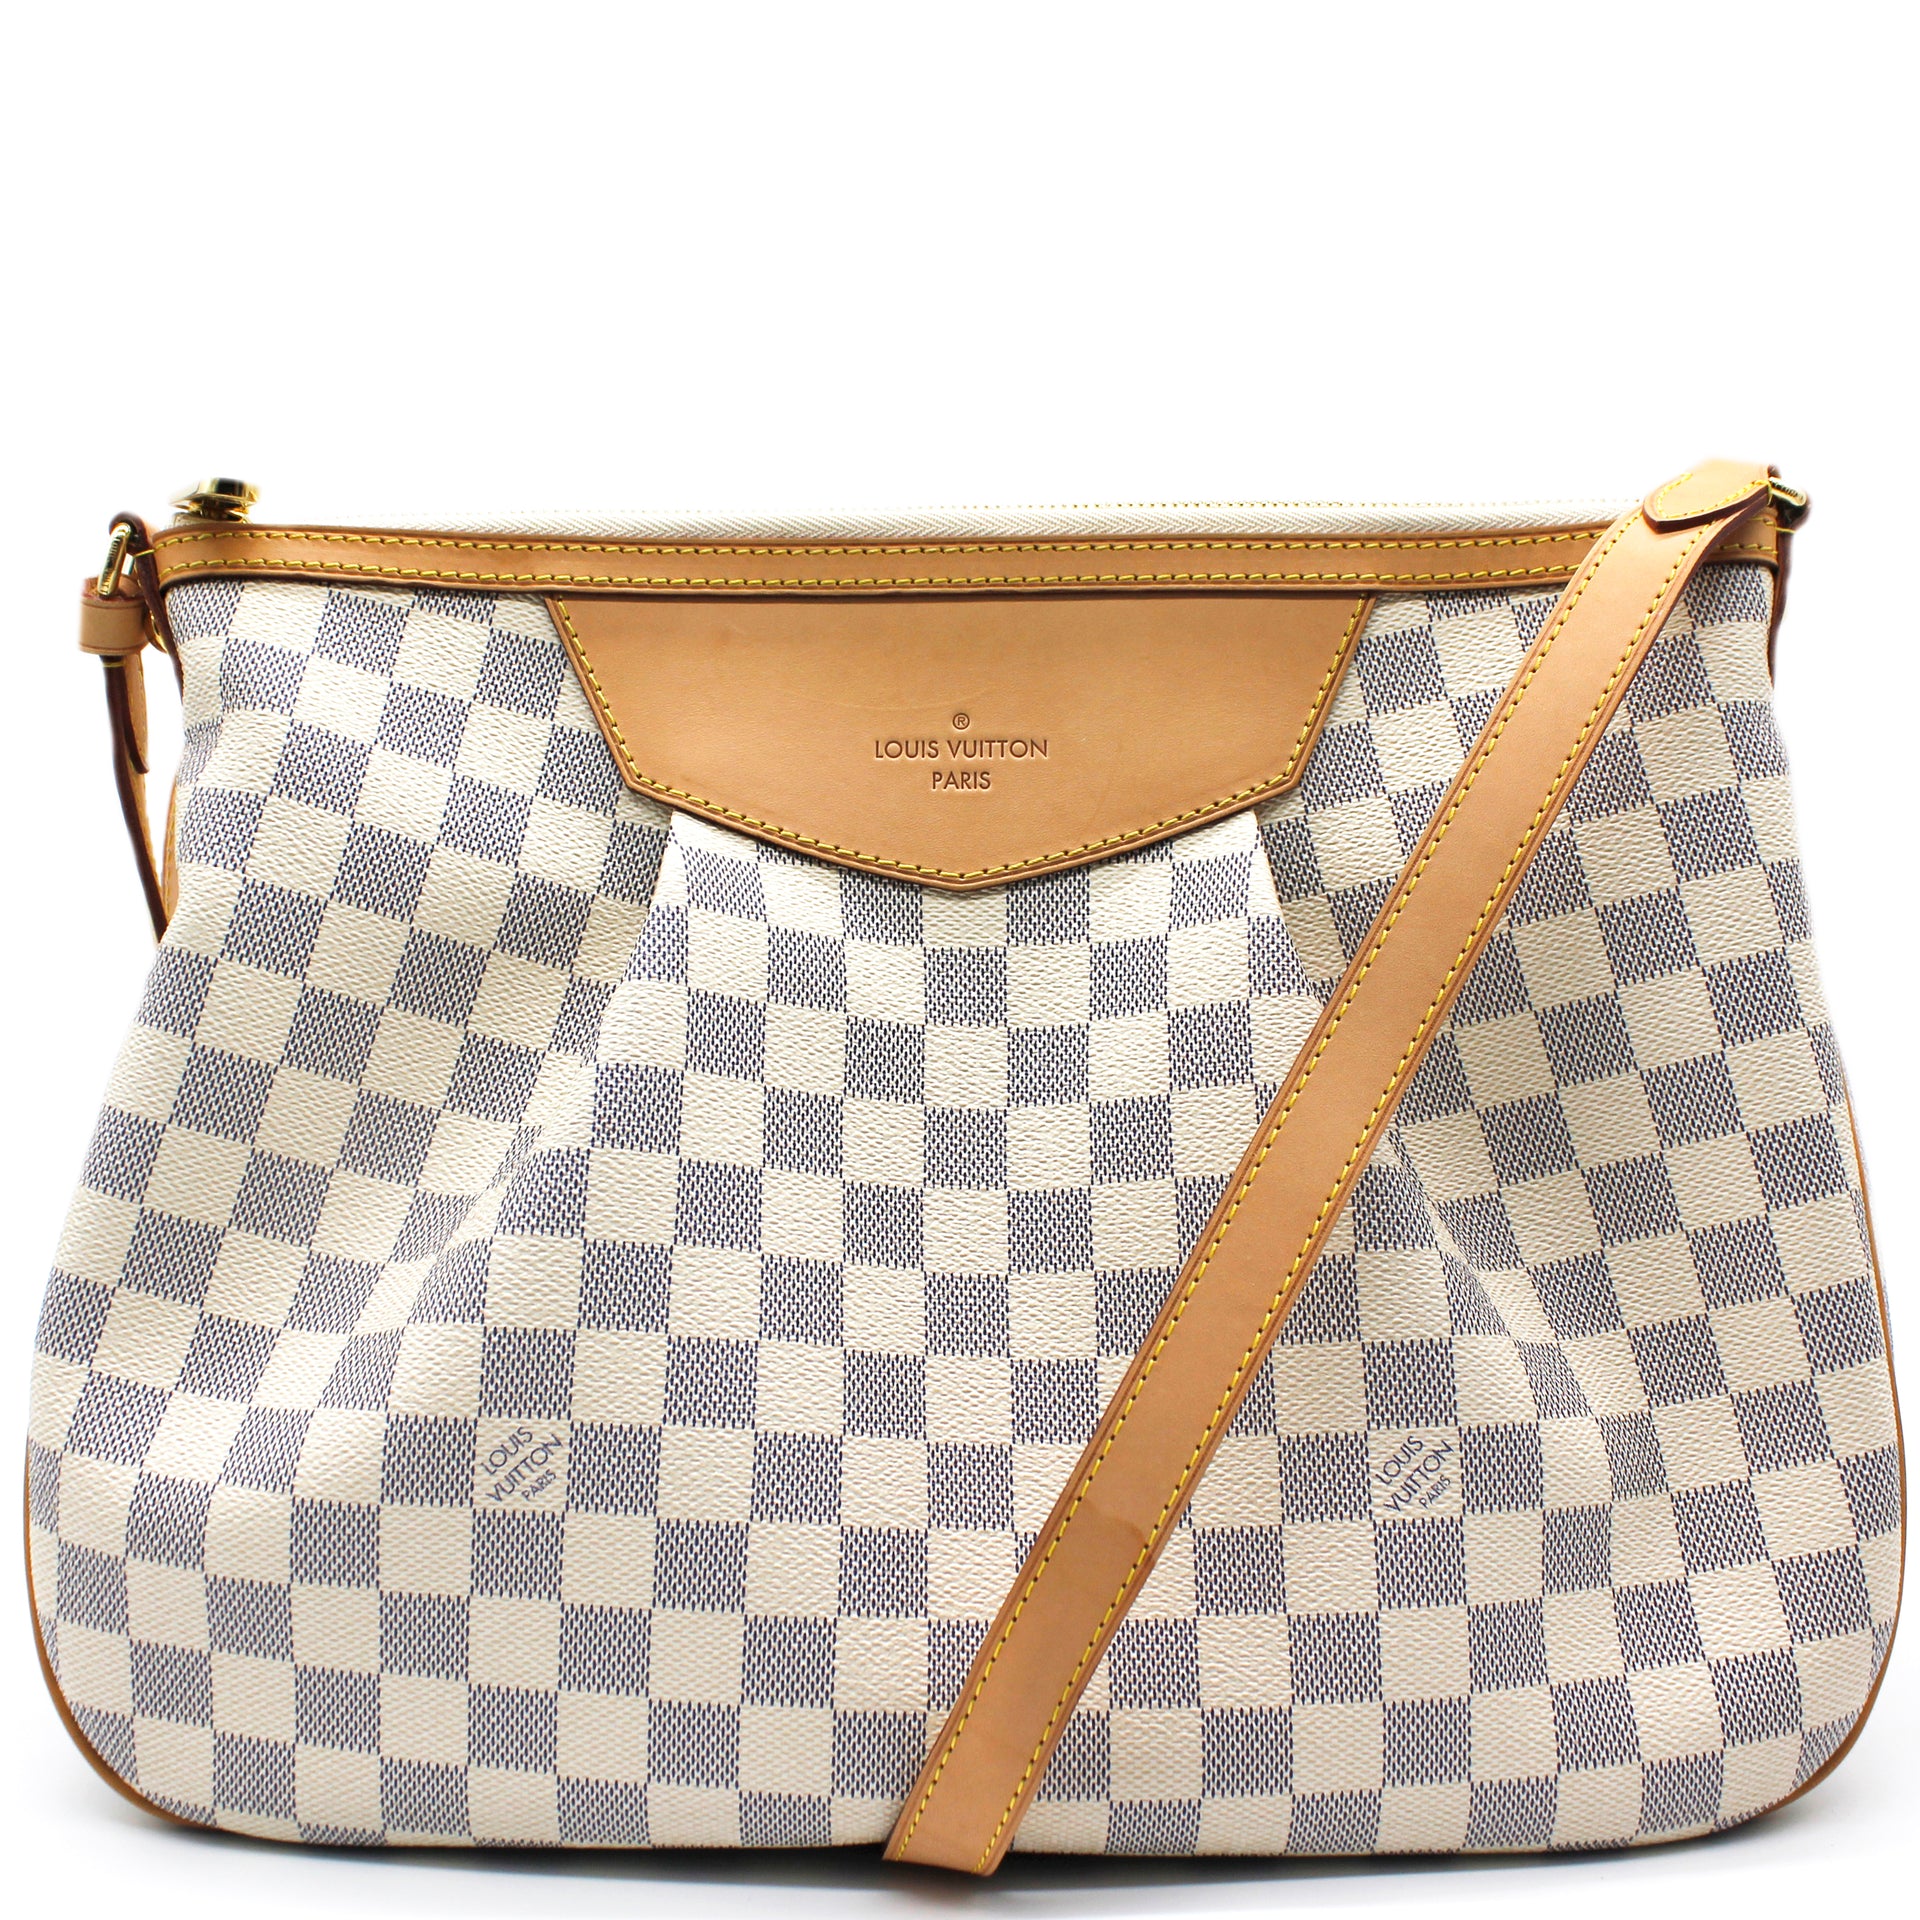 Louis+Vuitton+Siracusa+Shoulder+Bag+PM+White+Leather for sale